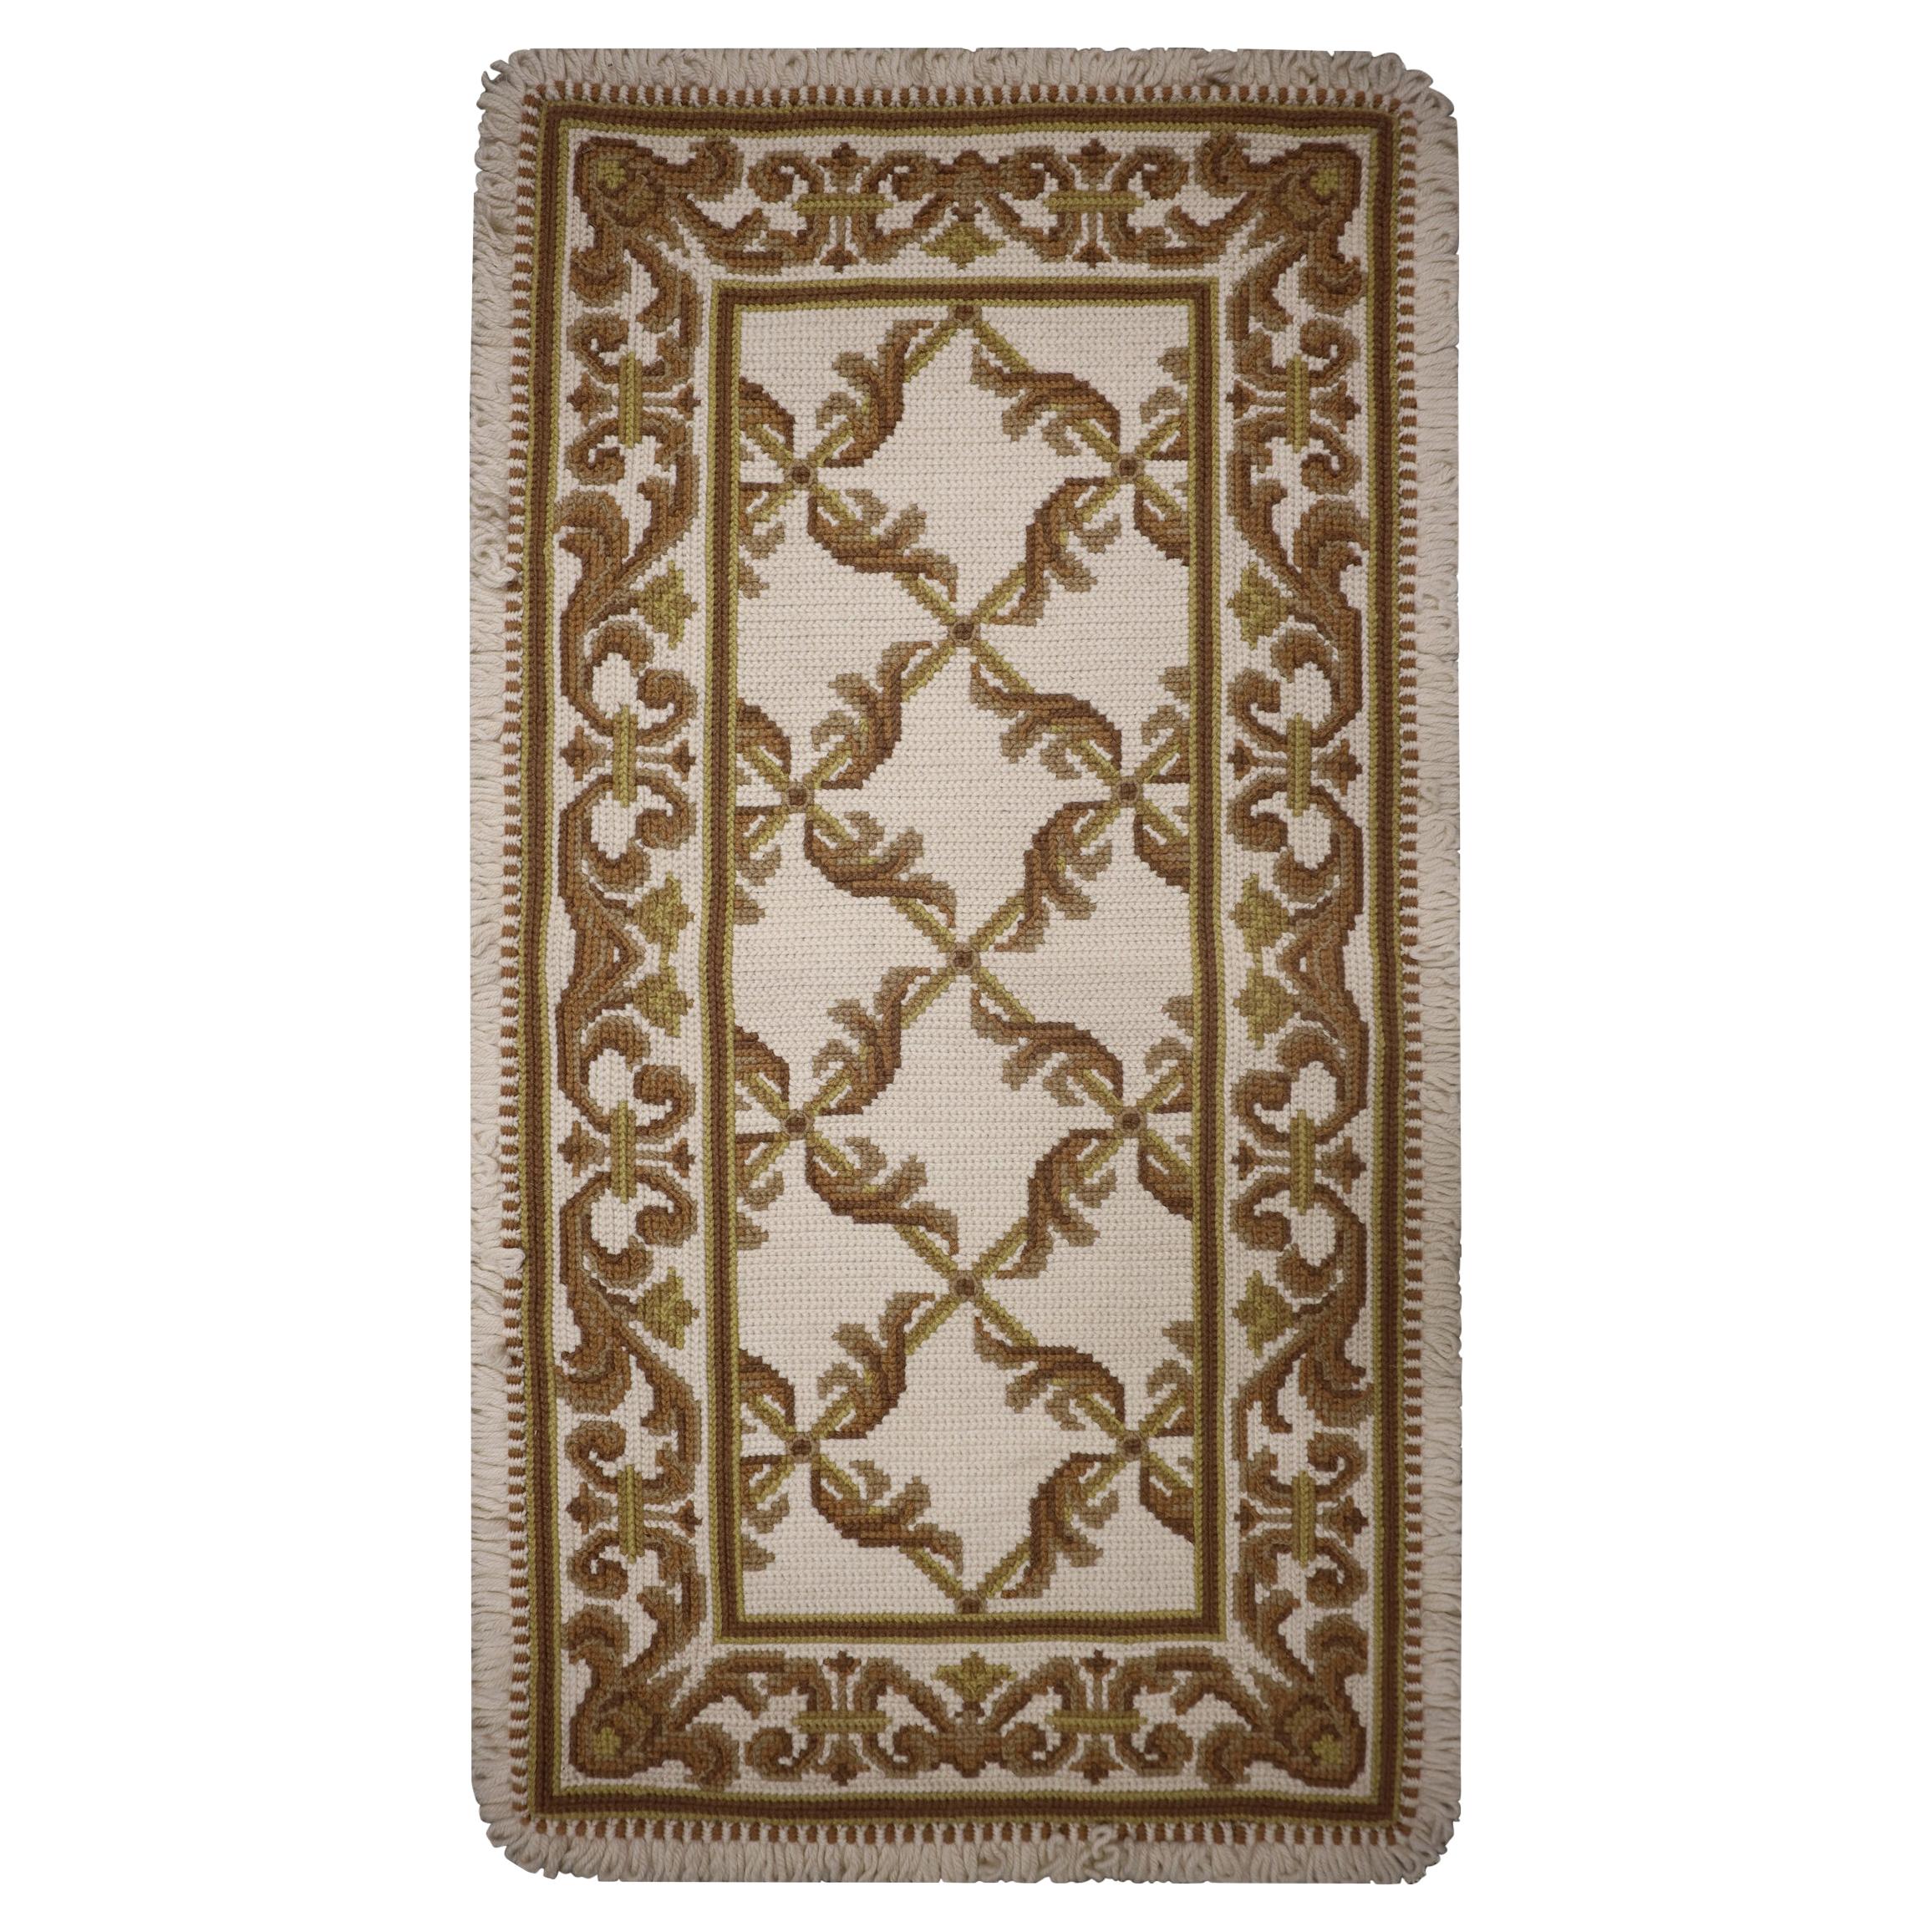 Portuguese Beige Cream Needlepoint Rug Hand Woven Traditional Carpet For Sale